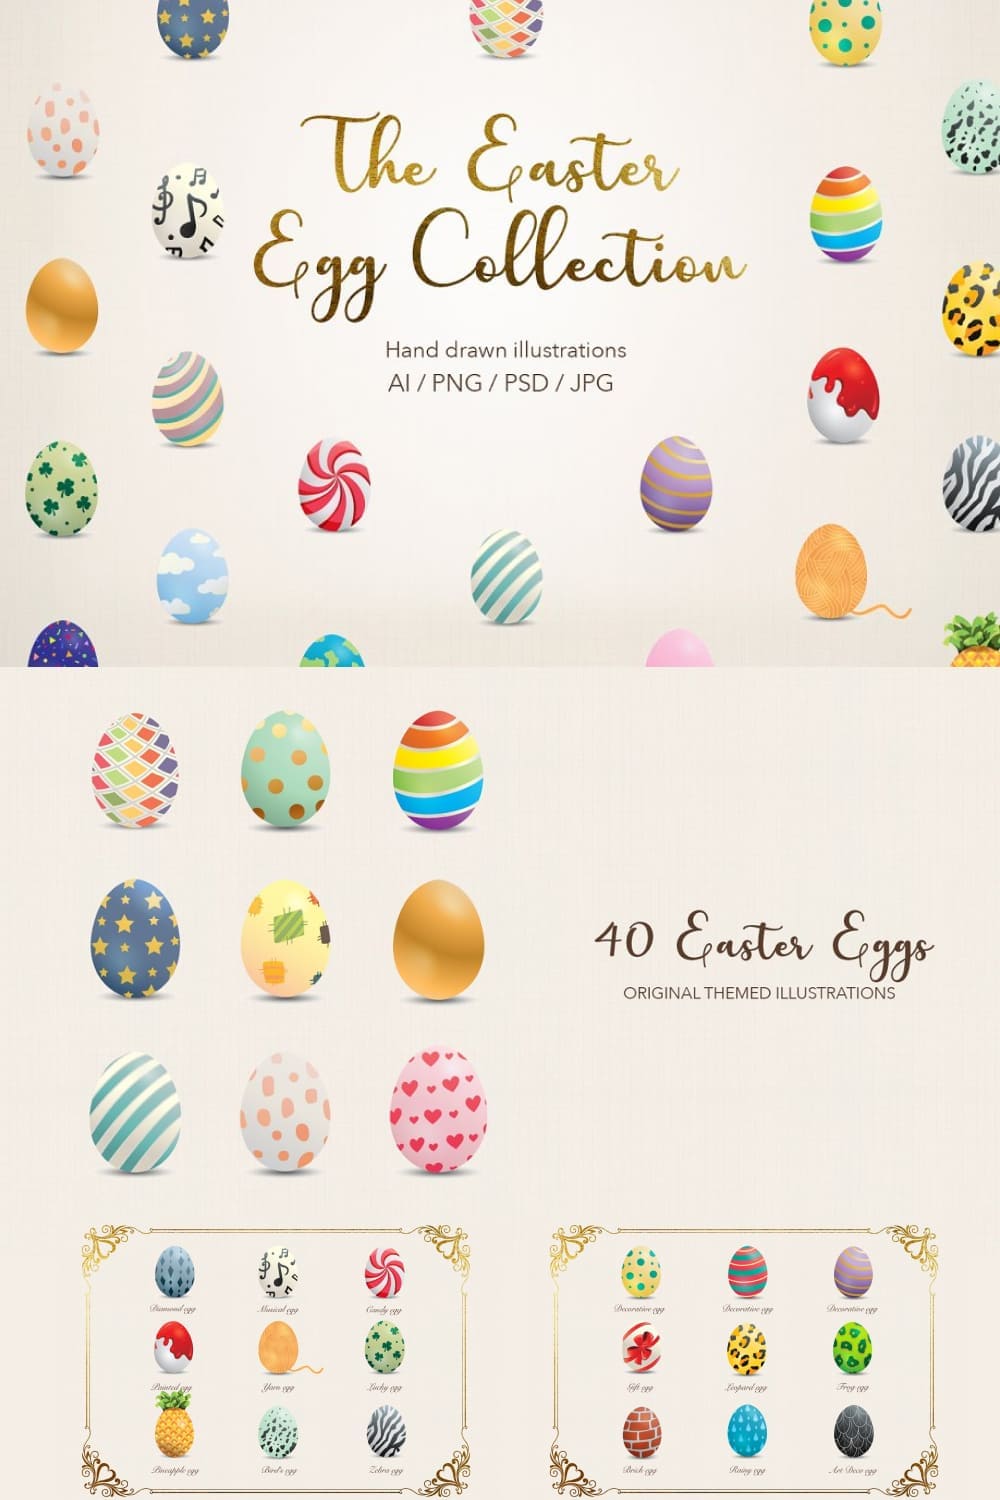 The Easter Egg Collection - pinterest image preview.